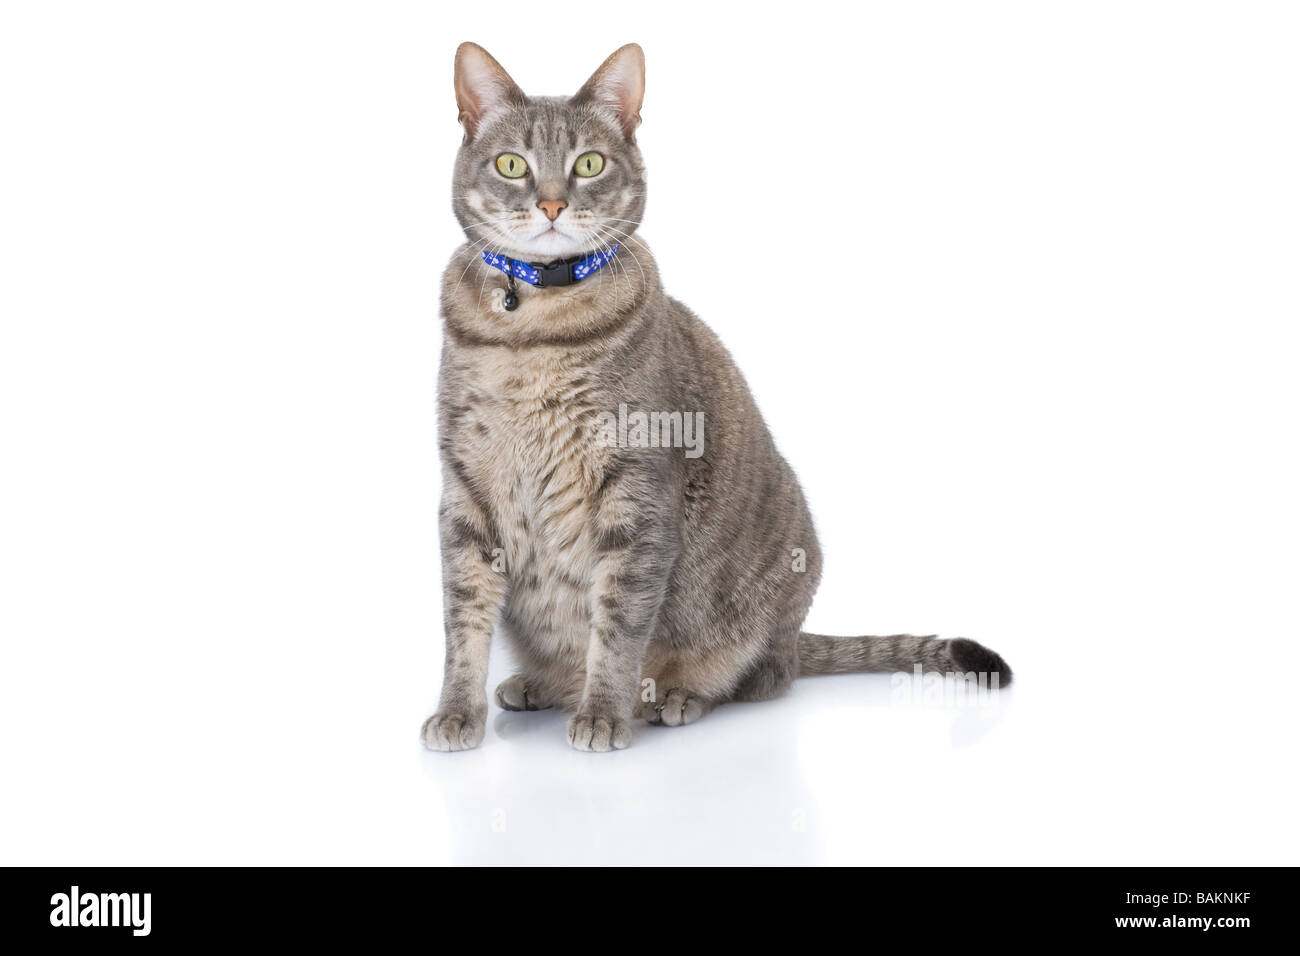 Tabby cat sitting and looking at camera isolated on white Stock Photo